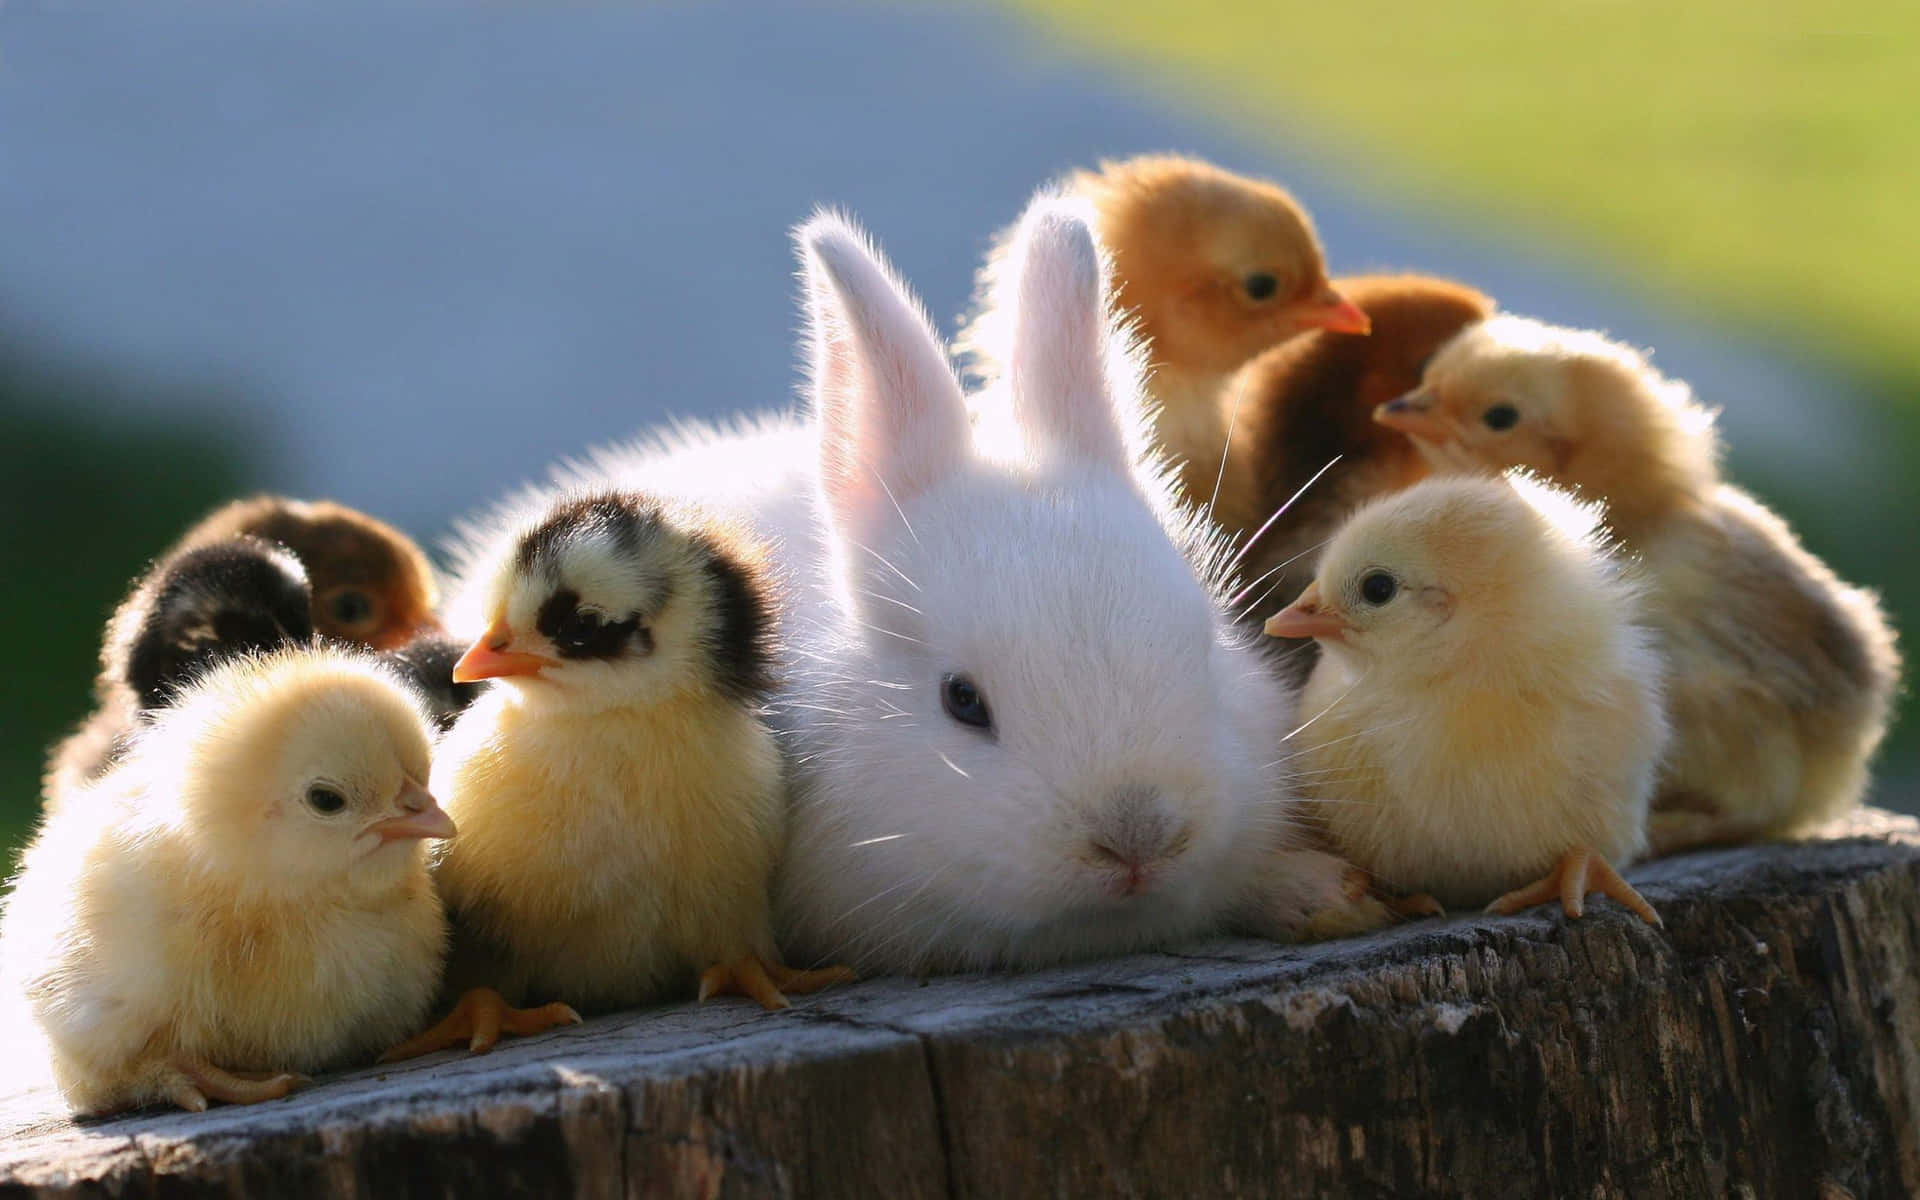 A White Rabbit With A Group Of Chickens